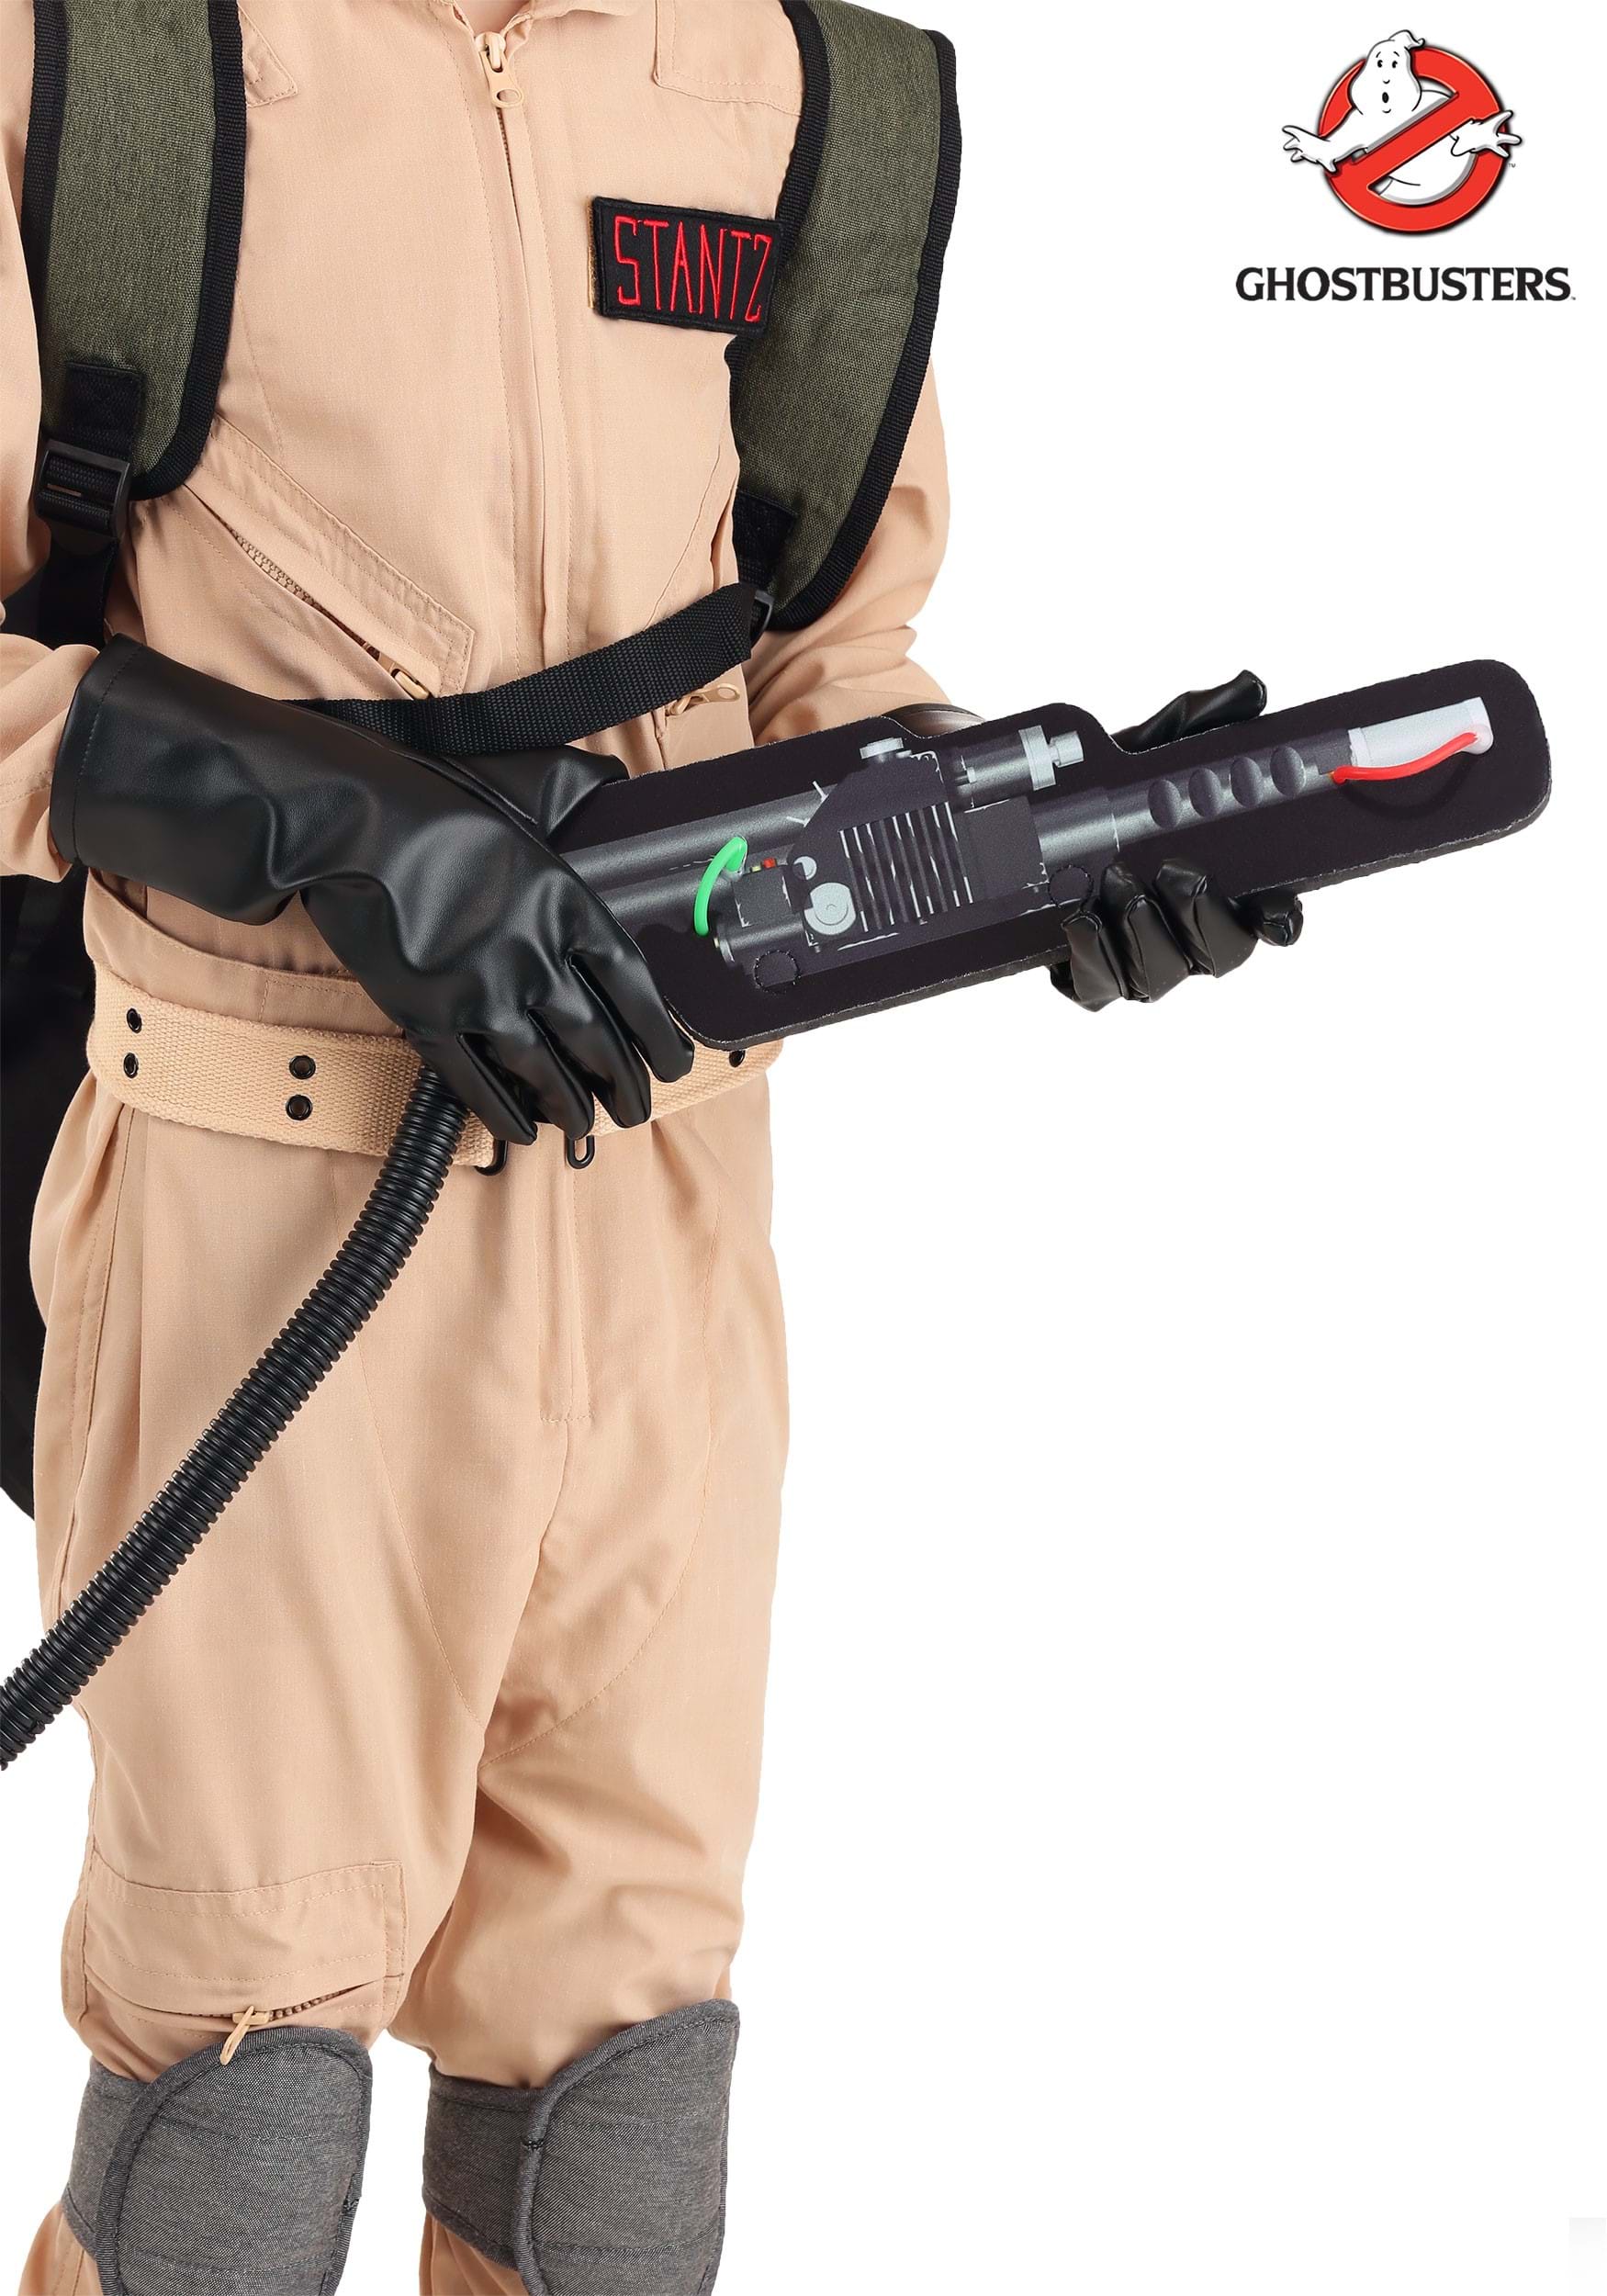 https://images.halloweencostumes.com/products/64878/1-1/ghostbusters-child-cosplay-gloves.jpg